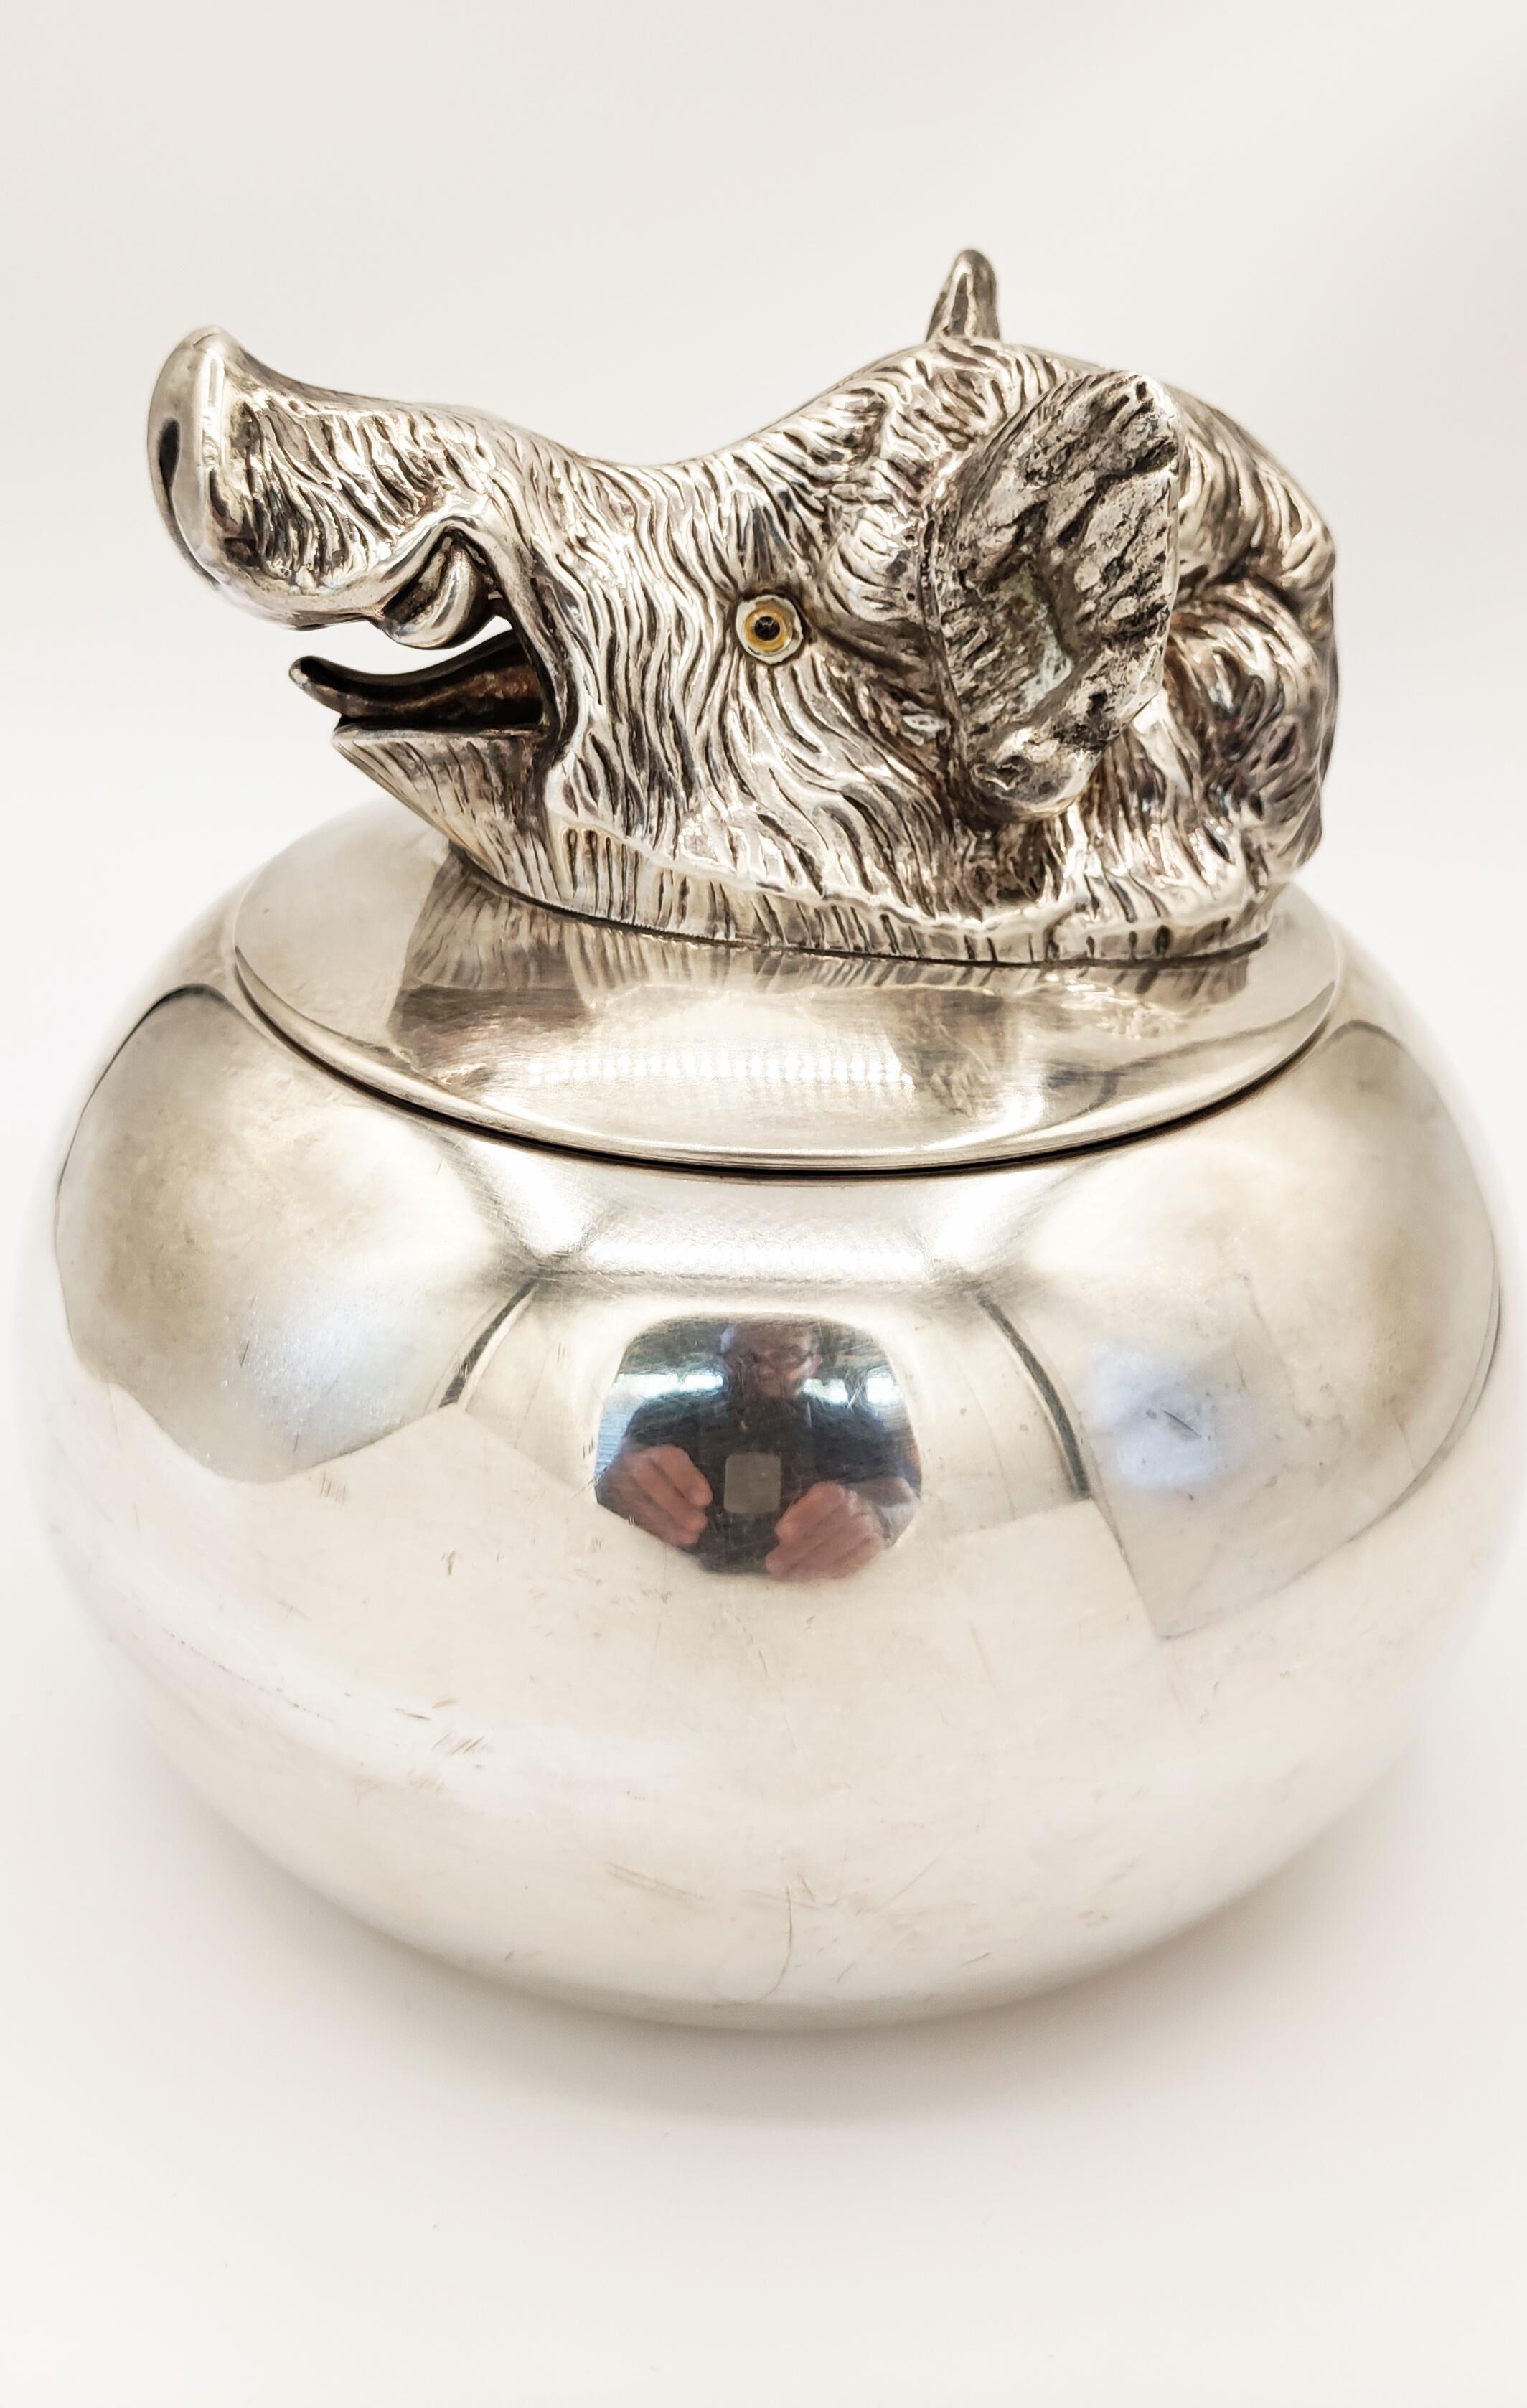 Rare Boar Silver Plated Ice Bucket by Valenti, Spain, 1970s 1